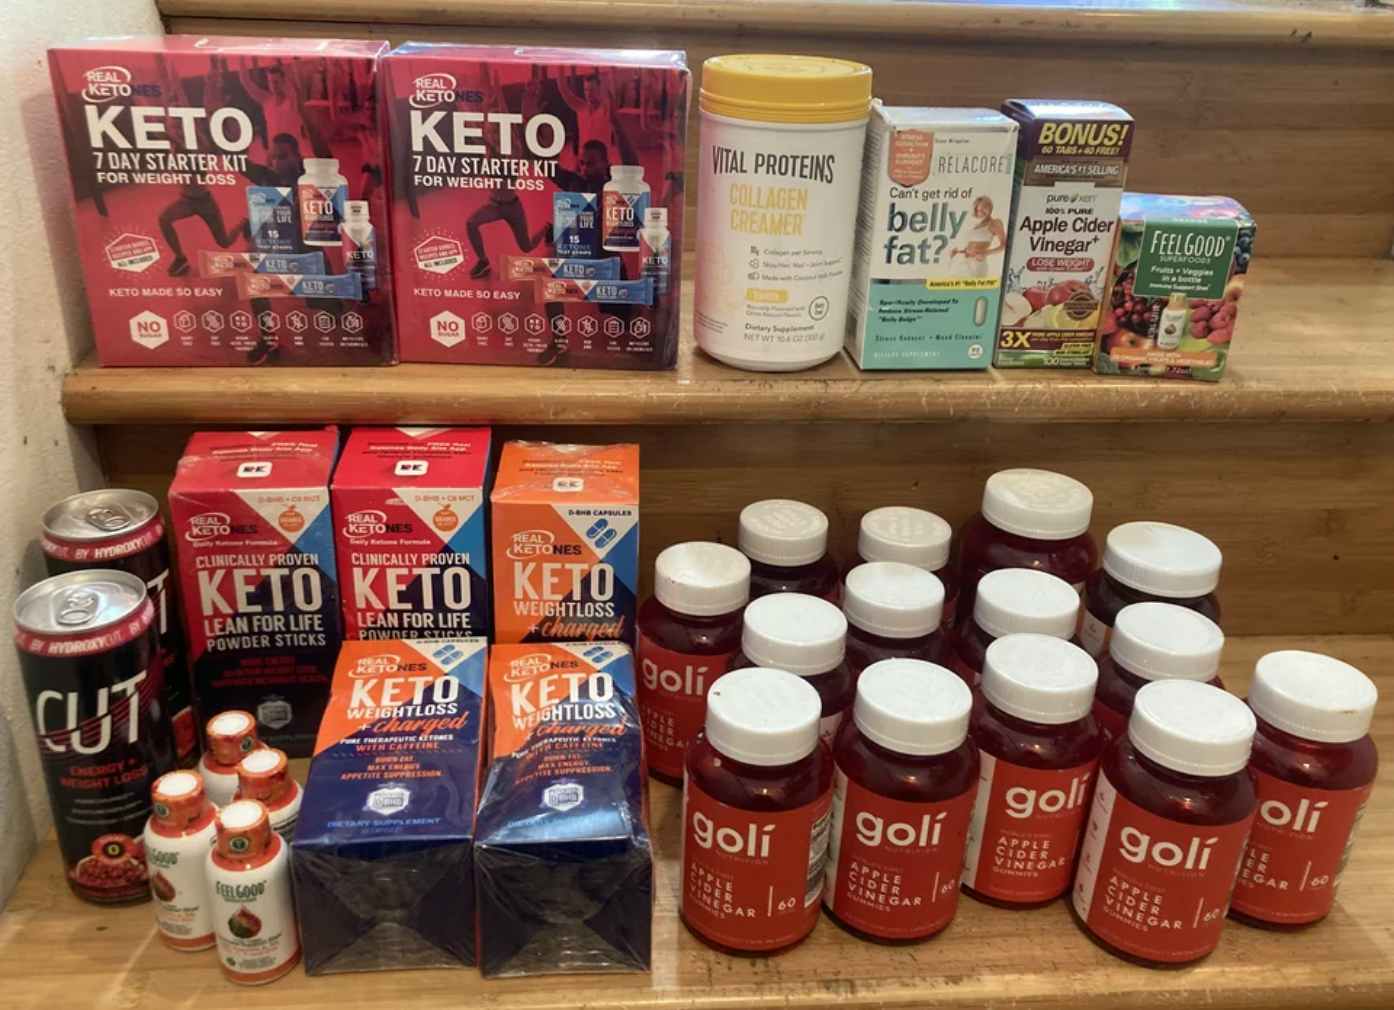 Walgreens dumpster diving finds, including Keto products and Goli supplements.